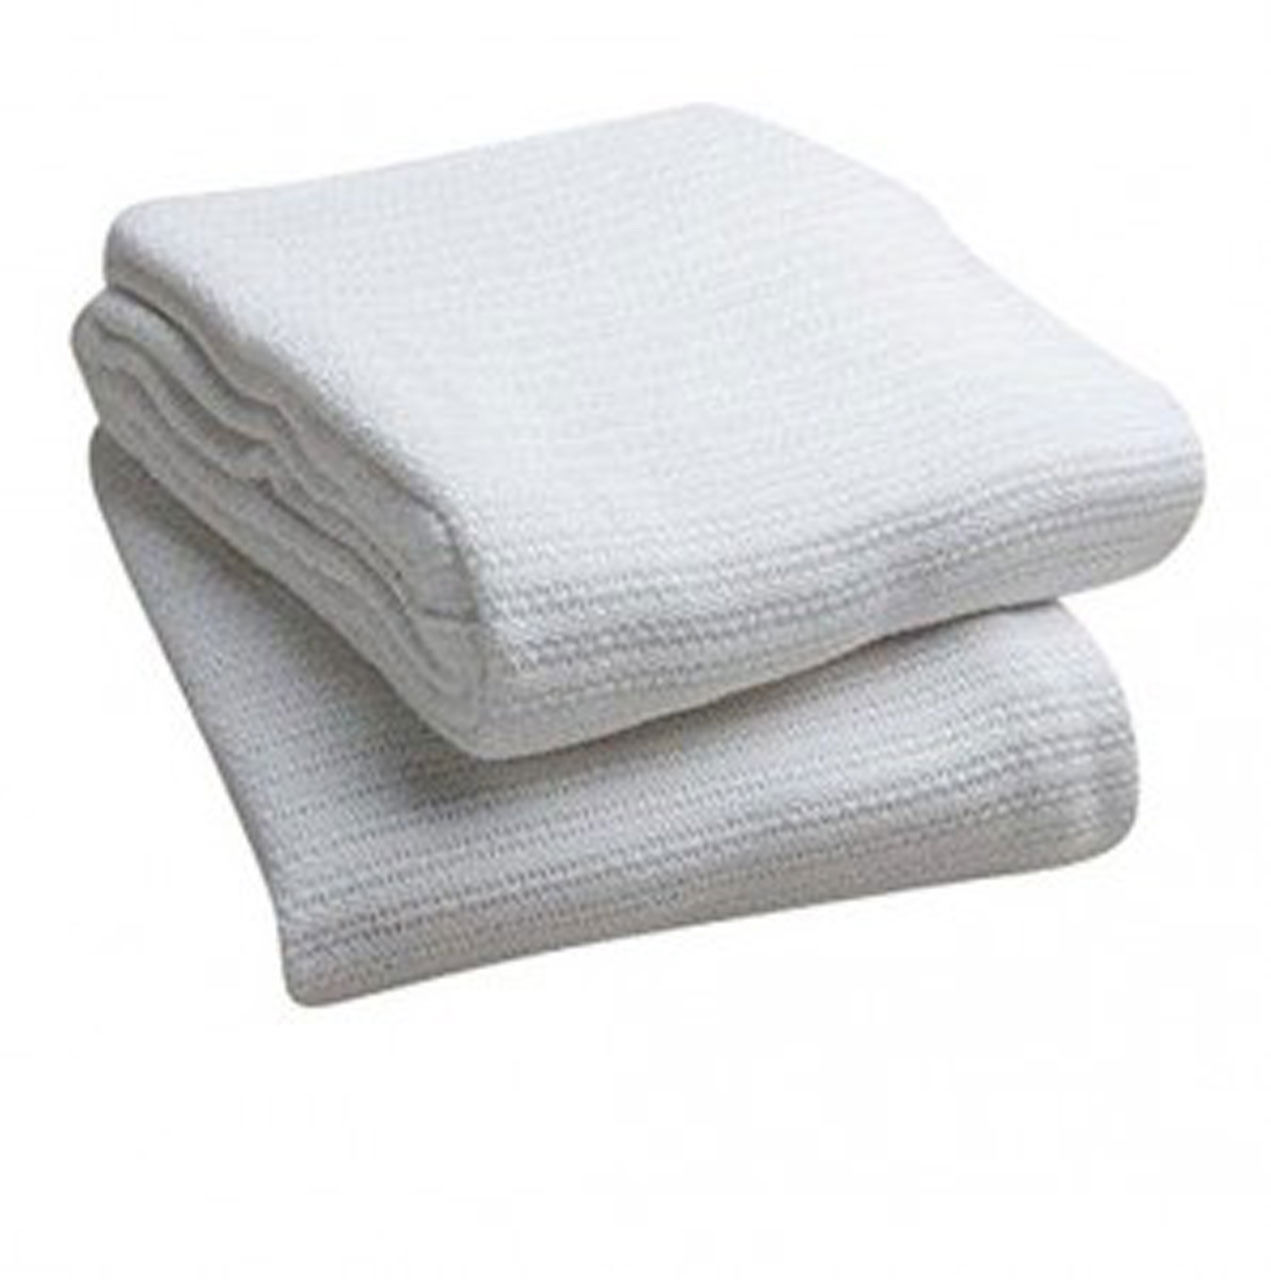 What is ensured by the cotton open weave design in the Open Weave Thermal Blanket, White?